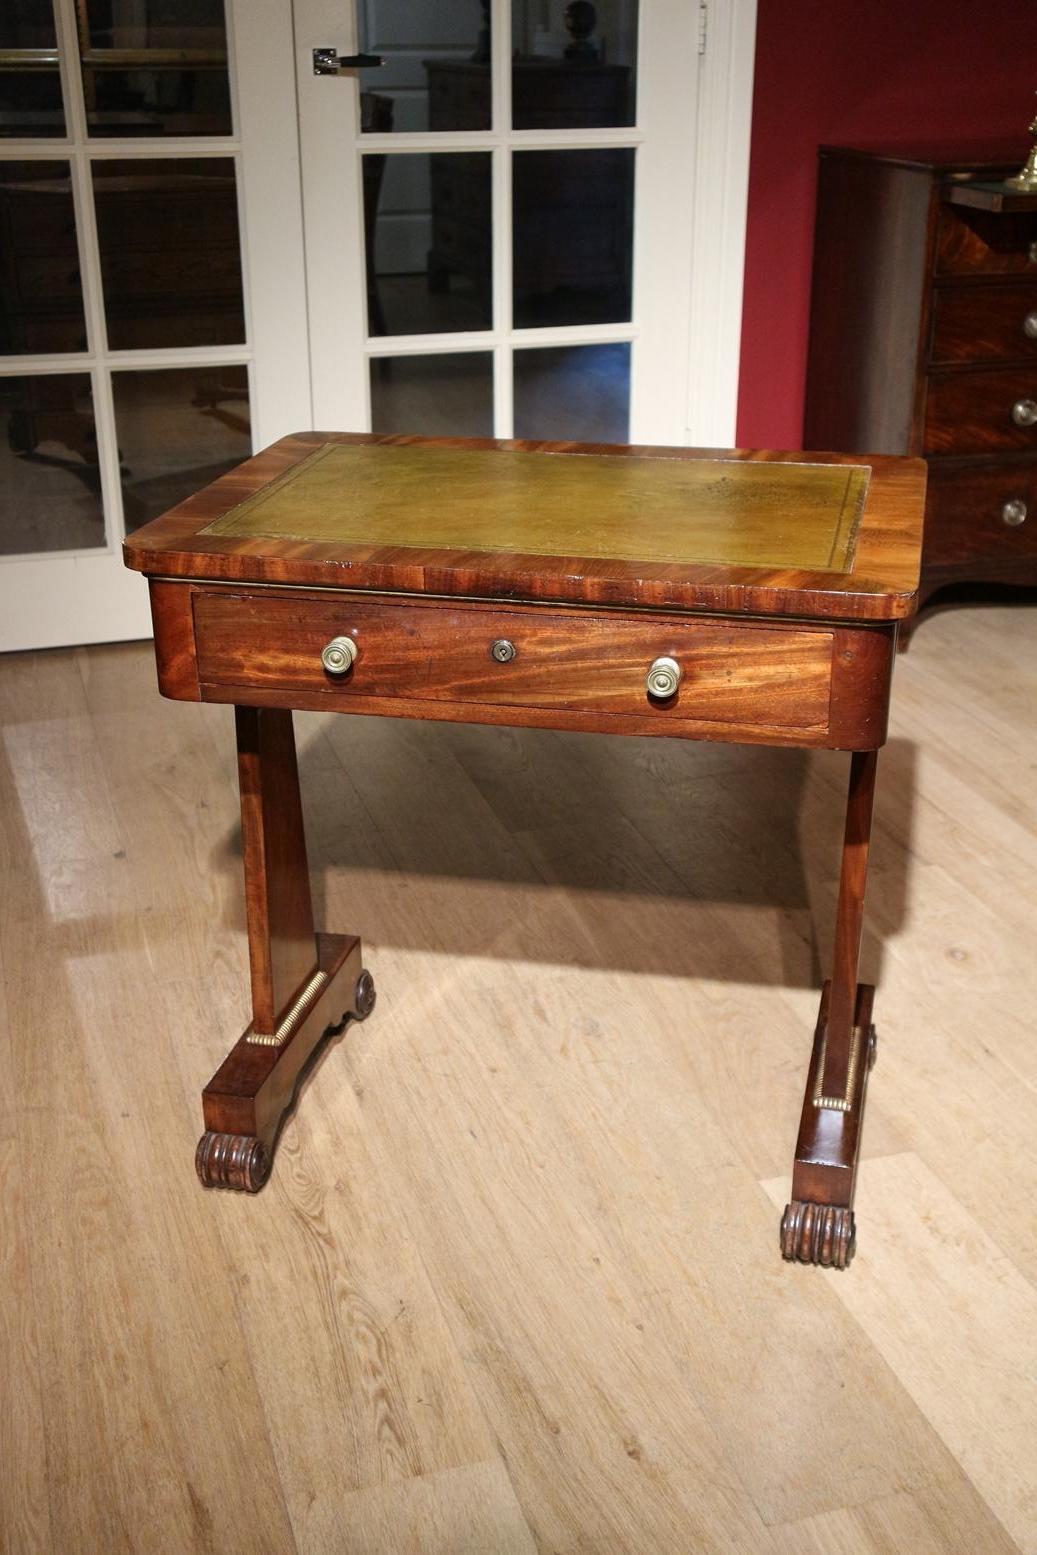 Beautiful small mahogany writing table and/or wall table. Top is provided with green leather. Table has 1 drawer. Other side is not a real drawer. The table can stand freely in the room. Beautiful warm weathered color mahogany. Table has a maker's